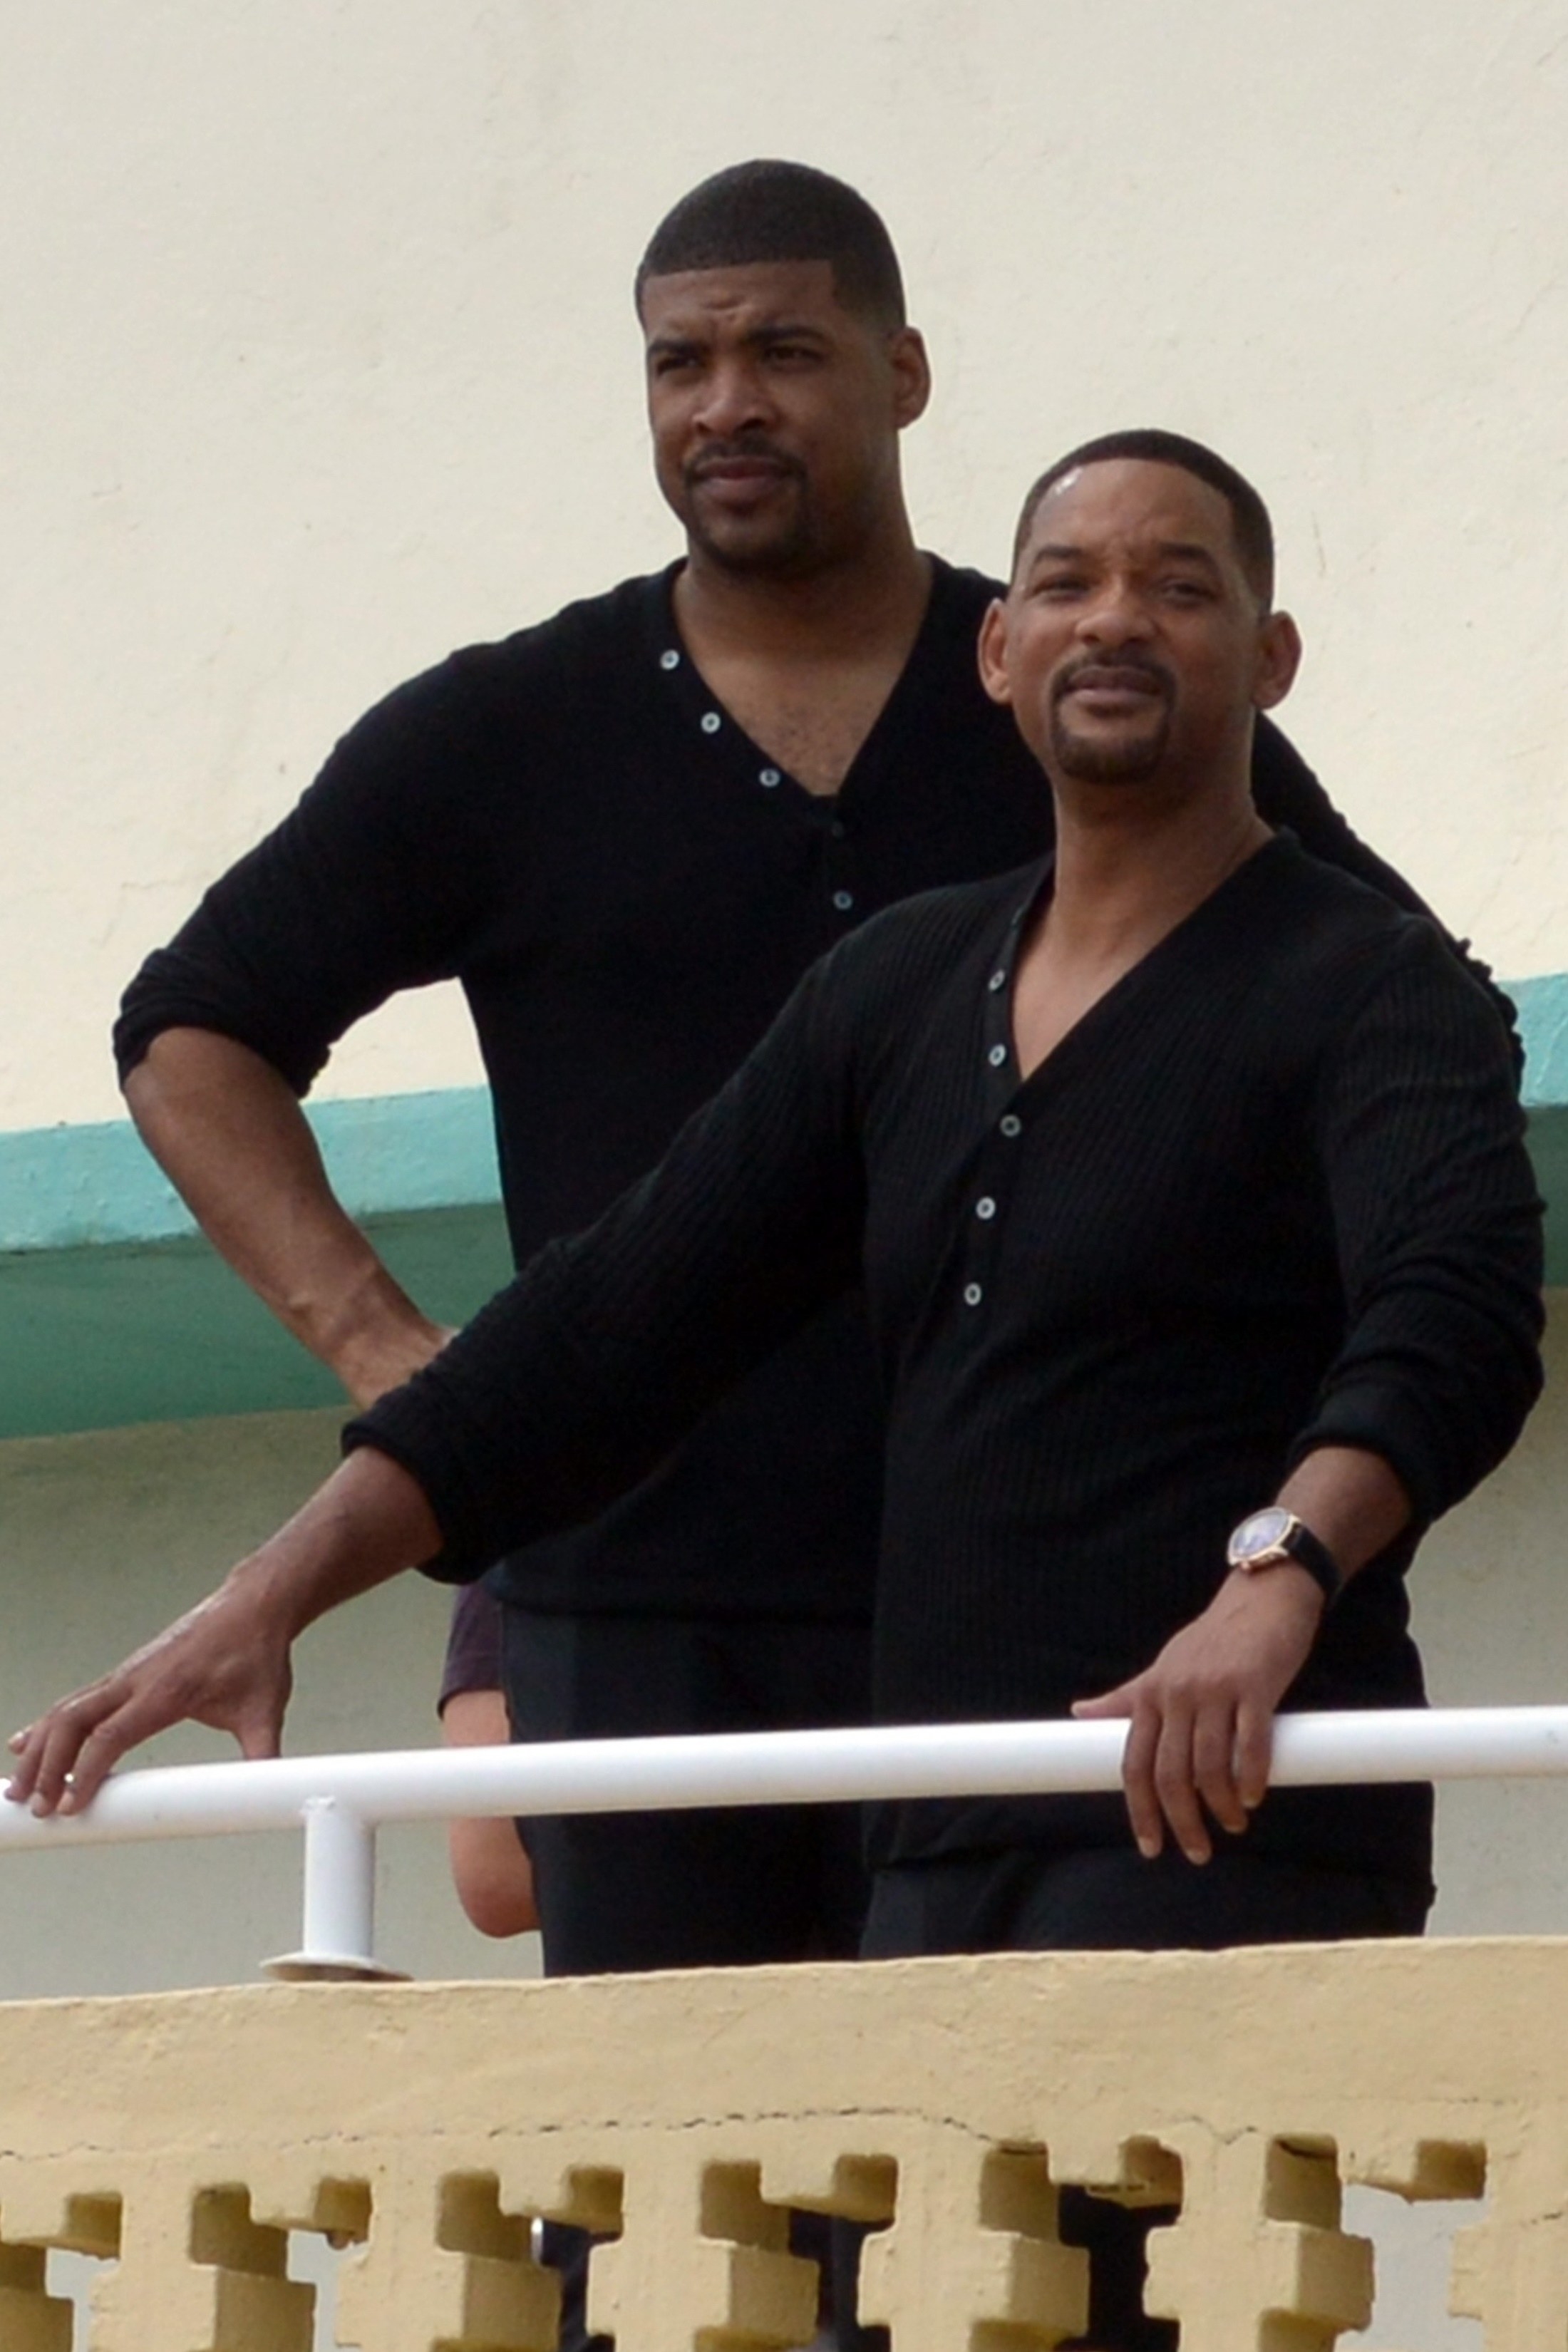 will smith and his stunt double